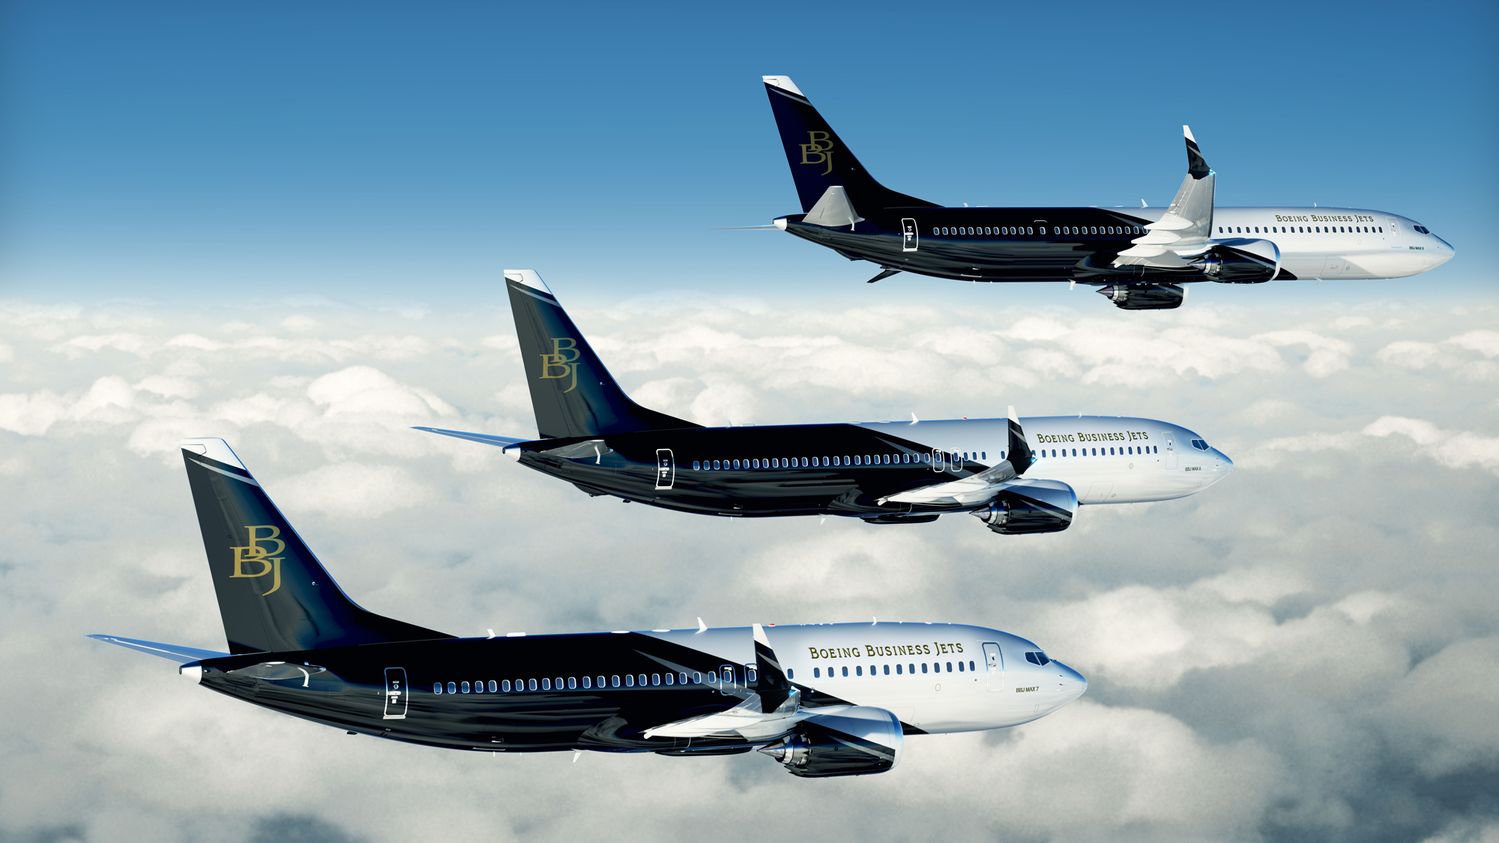 The initial Genesis concept was based on the Boeing 737 Max 7, but can be adapted for the larger Max 8 and Max 9 versions.